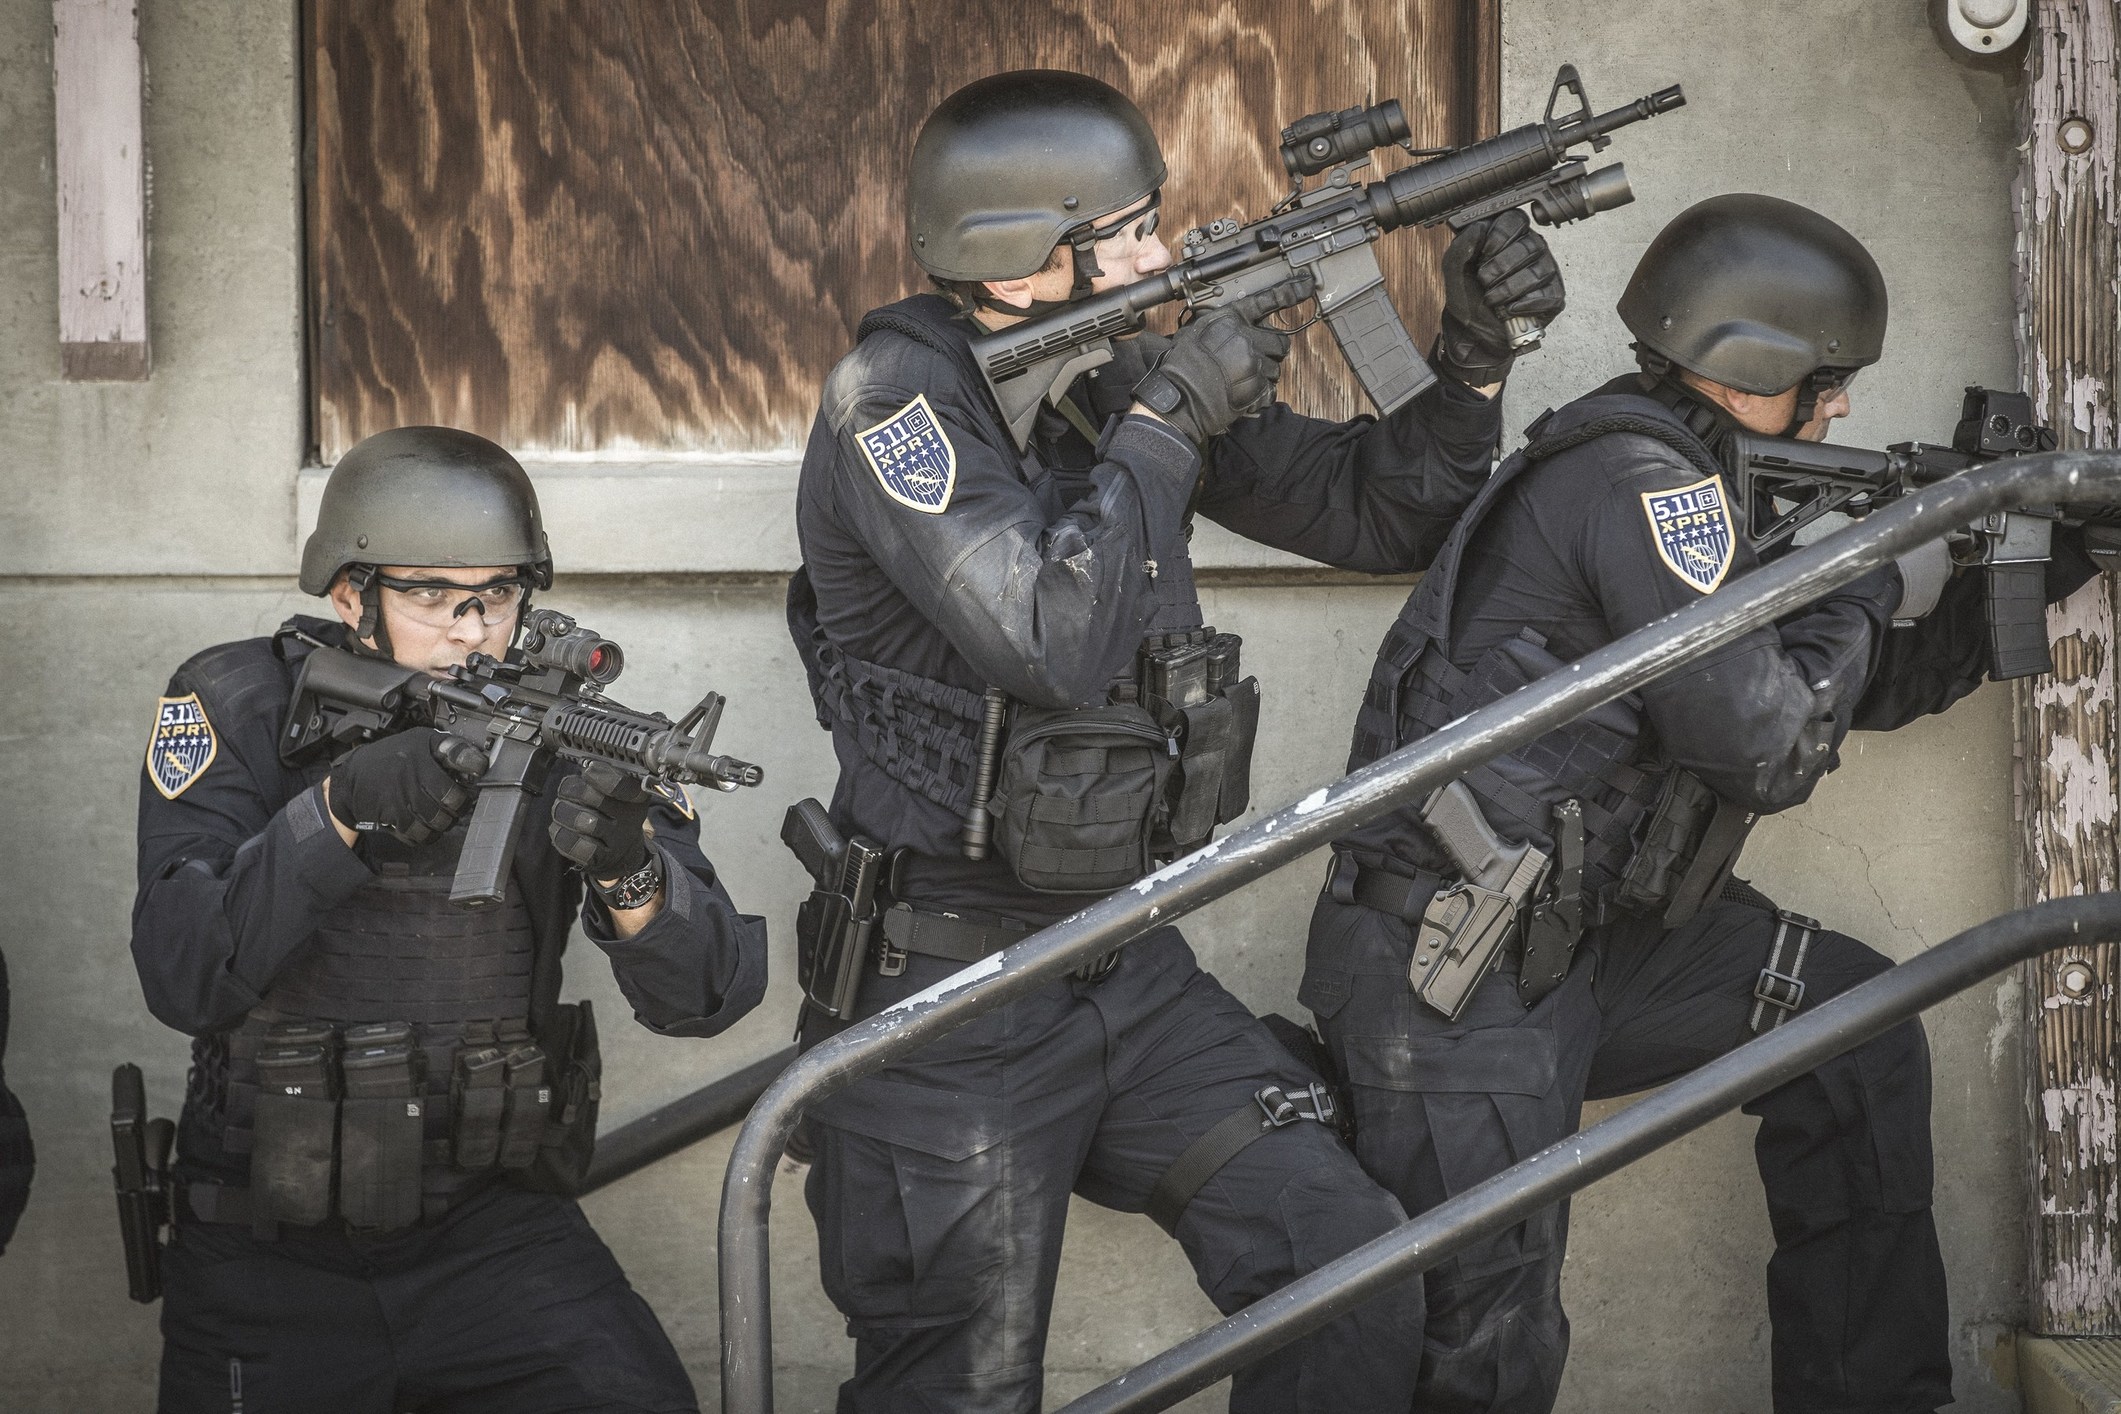 5.11 Tactical® Introduces The World's Most Innovative Tactical Uniform